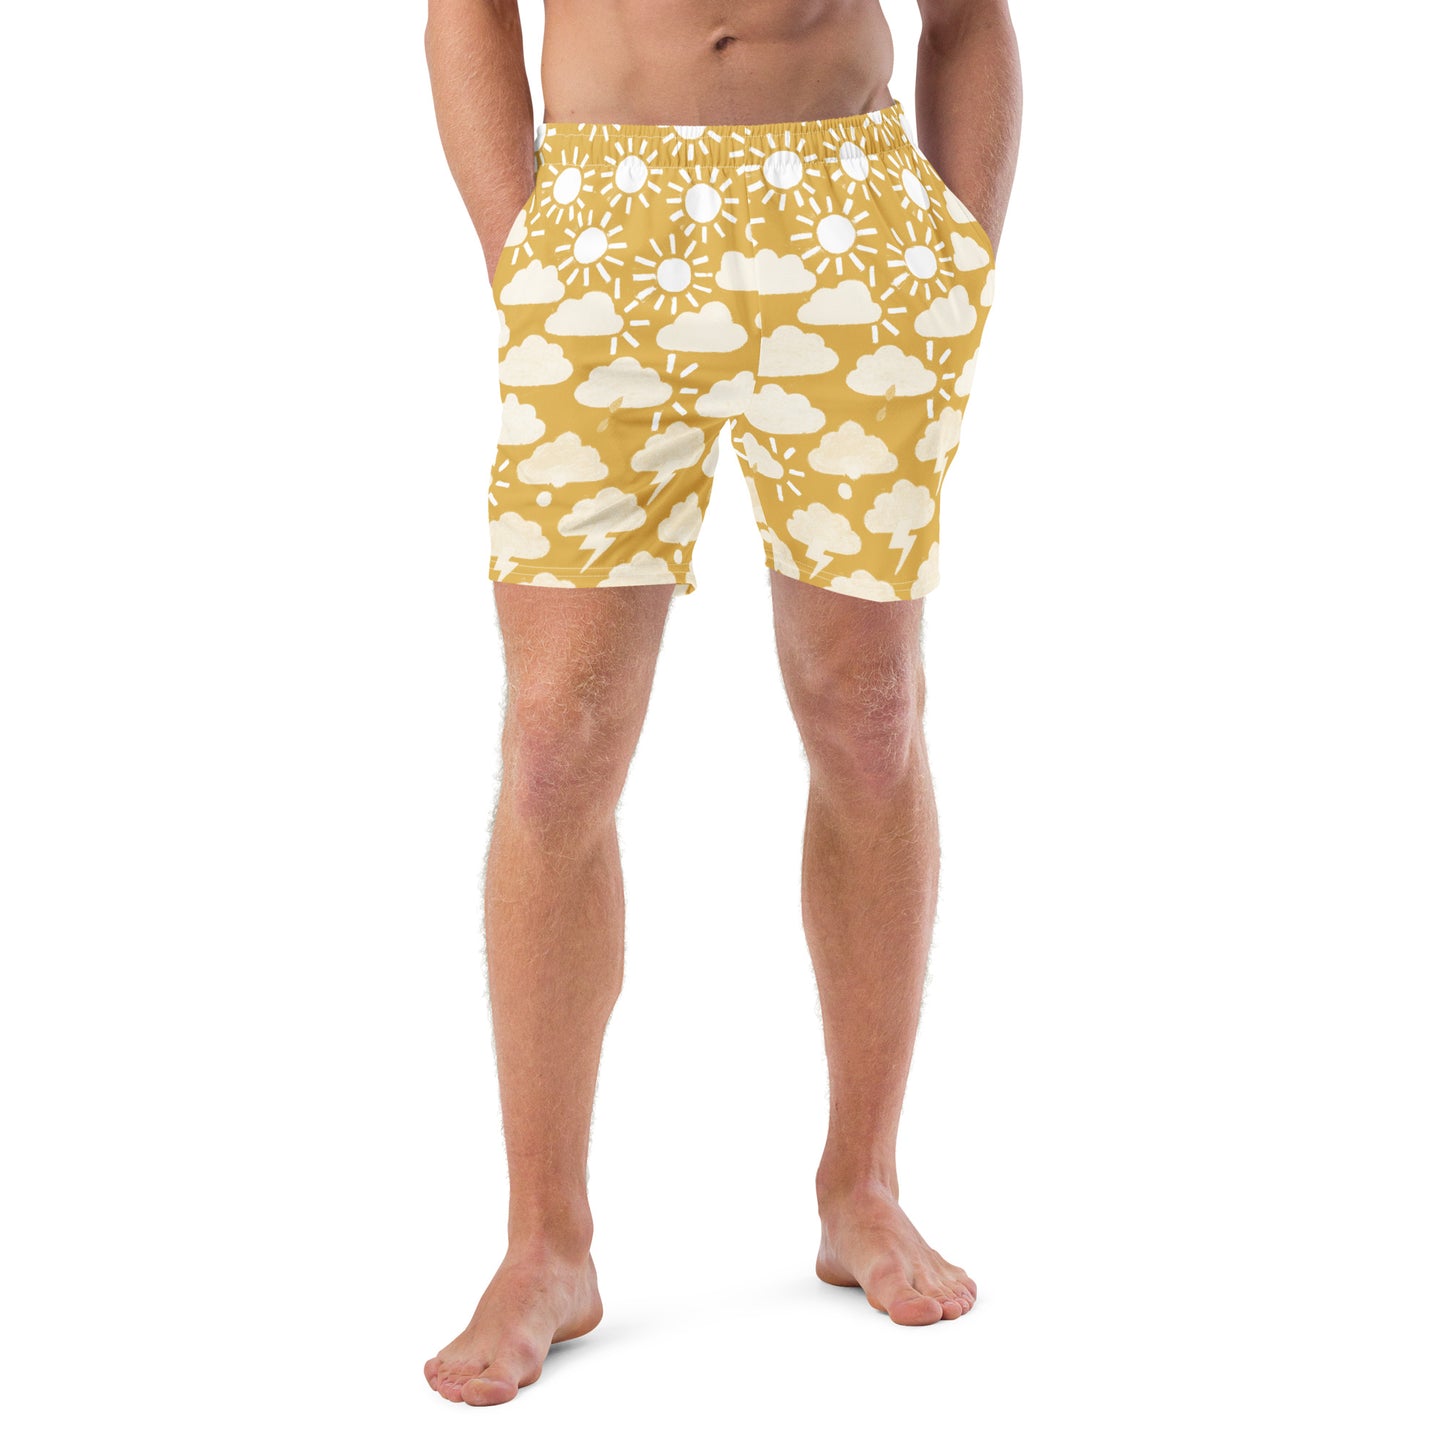 ♻️ Whatever the weather (yellow) Men's Recycled Swim Trunks